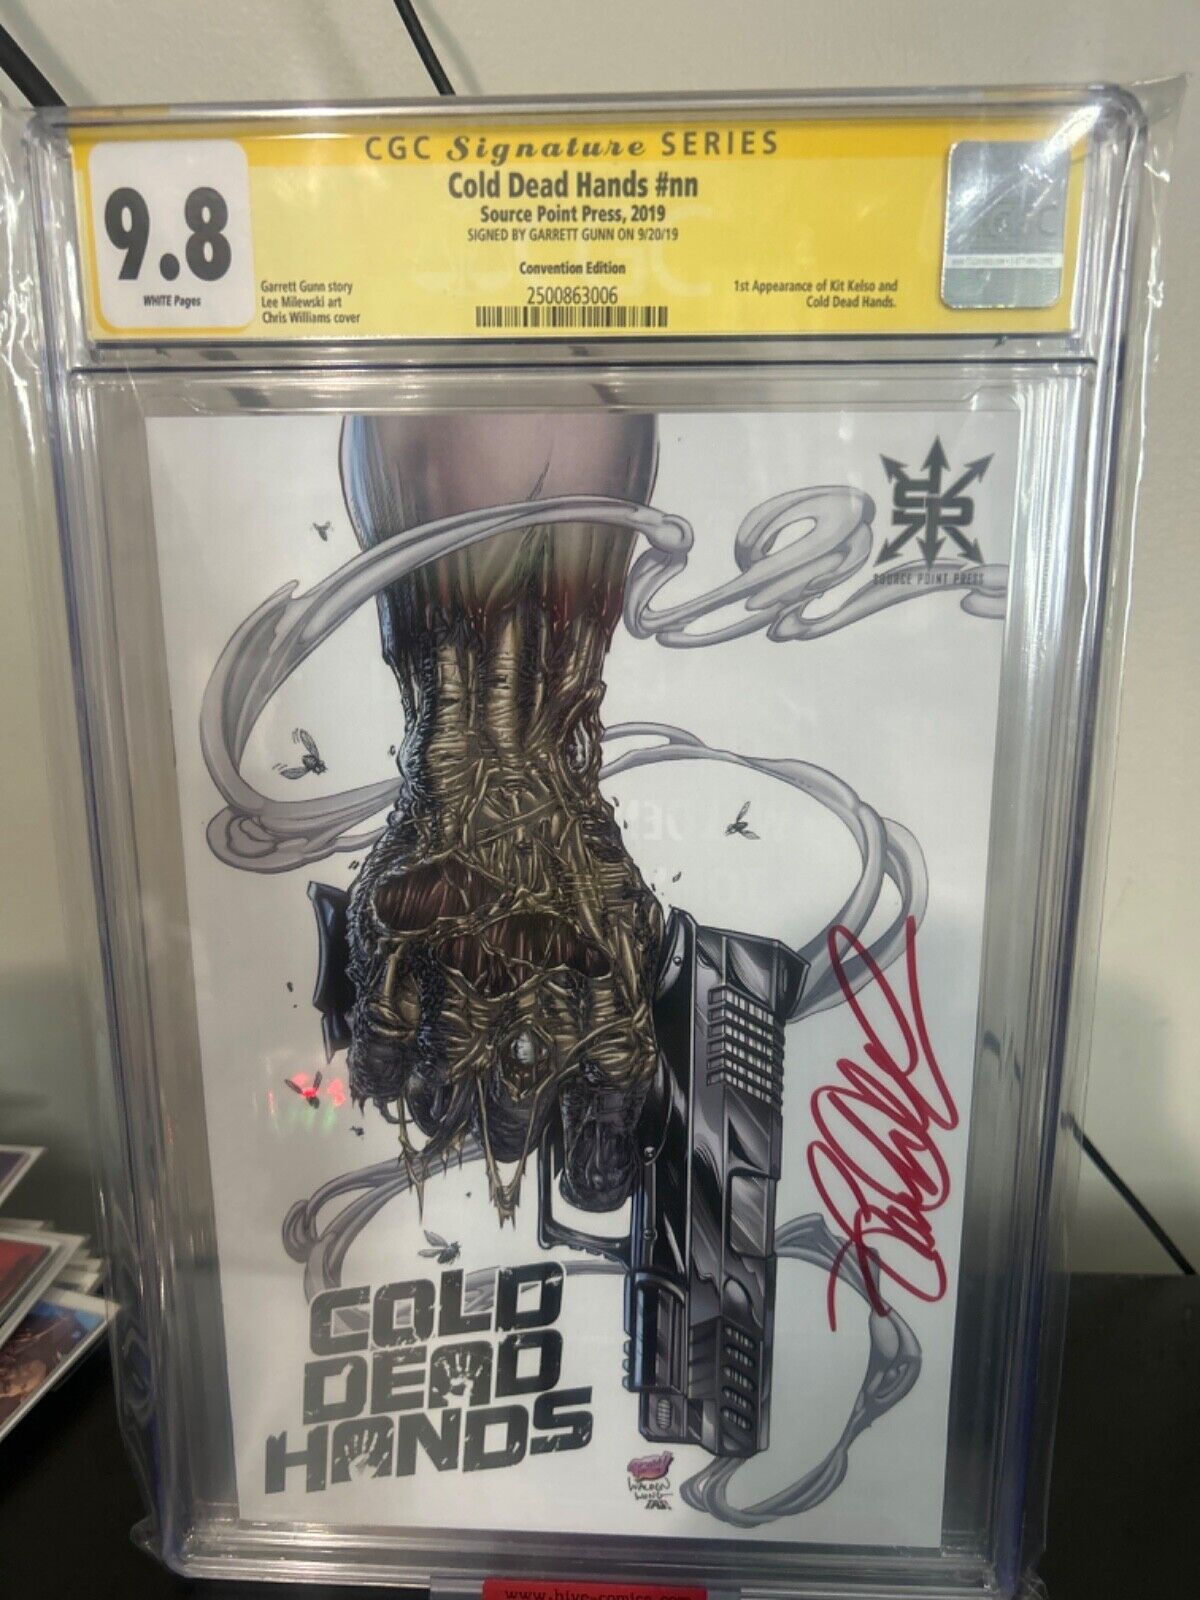 Signed CGC 98 Cold Dead Hands NN Convention Exclusive Optioned RARE ashcan